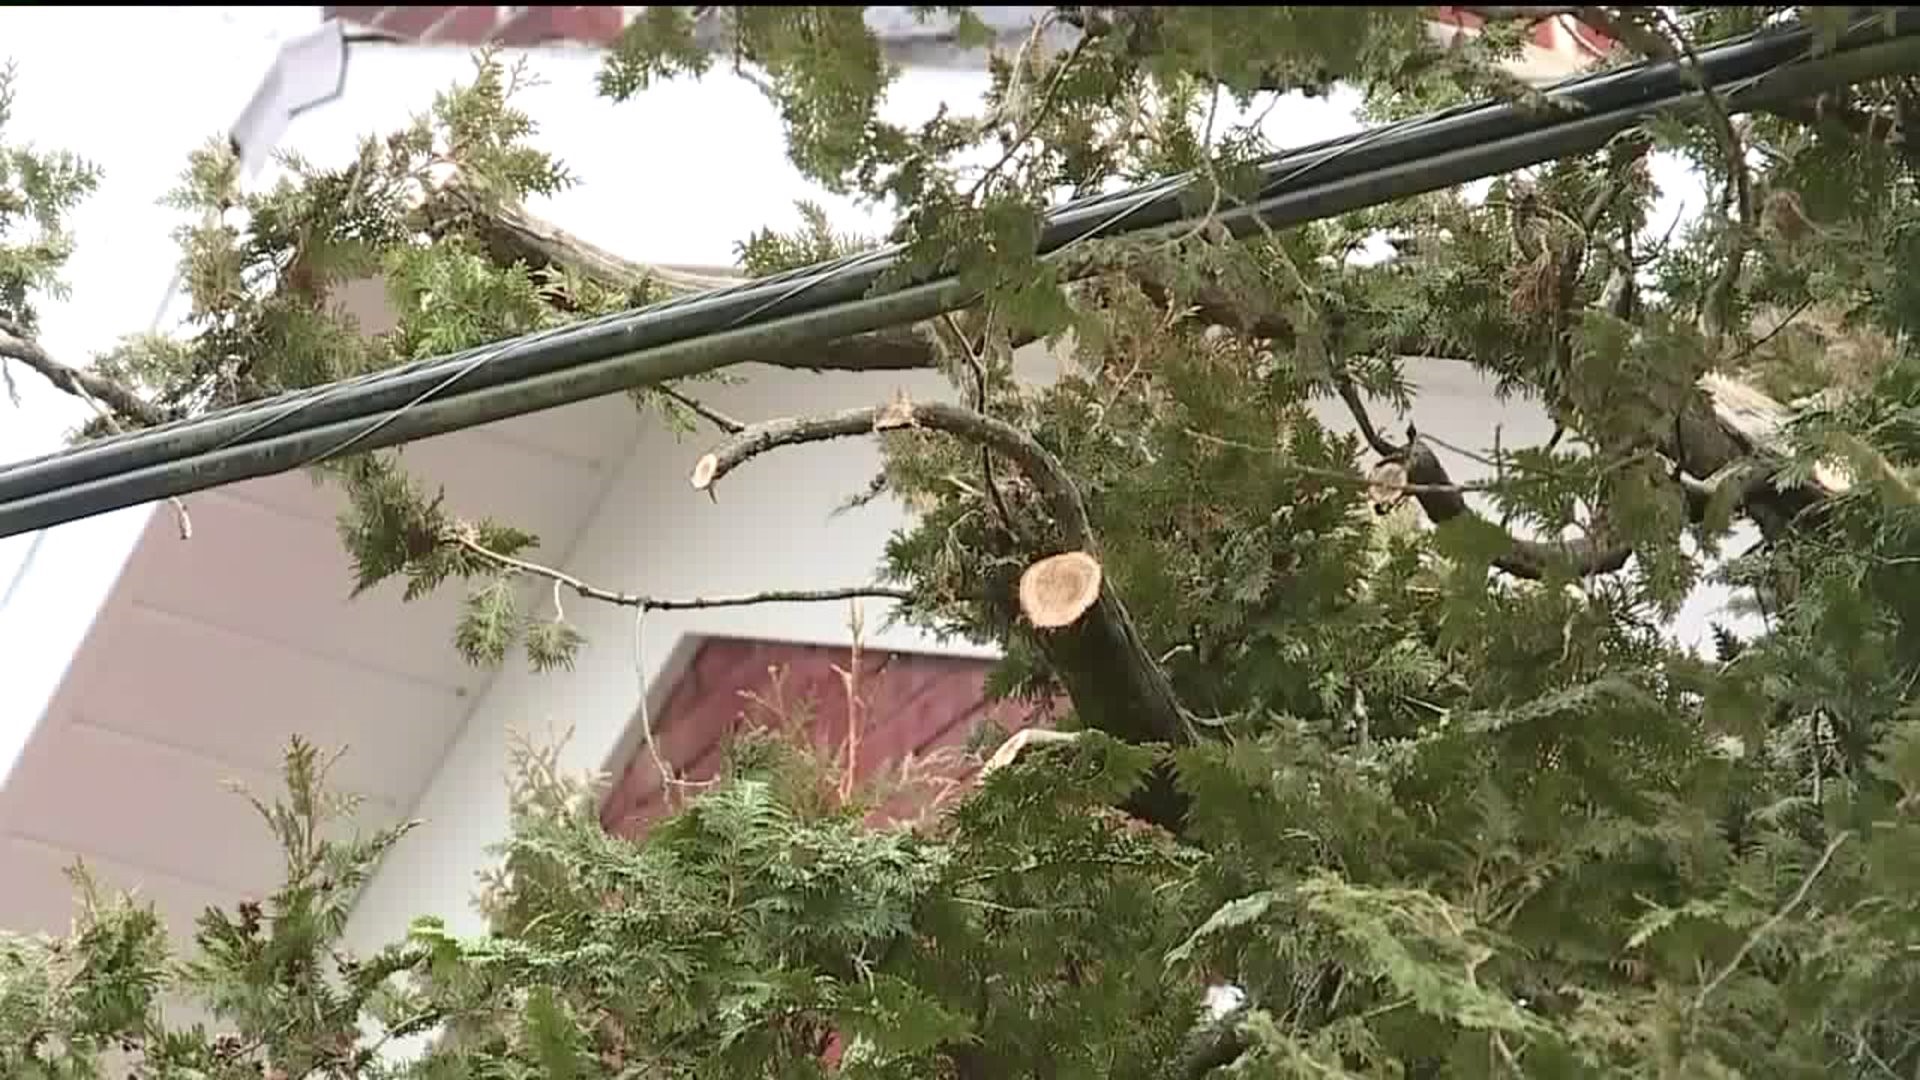 Worker Shocked by Power Line While Trimming Trees